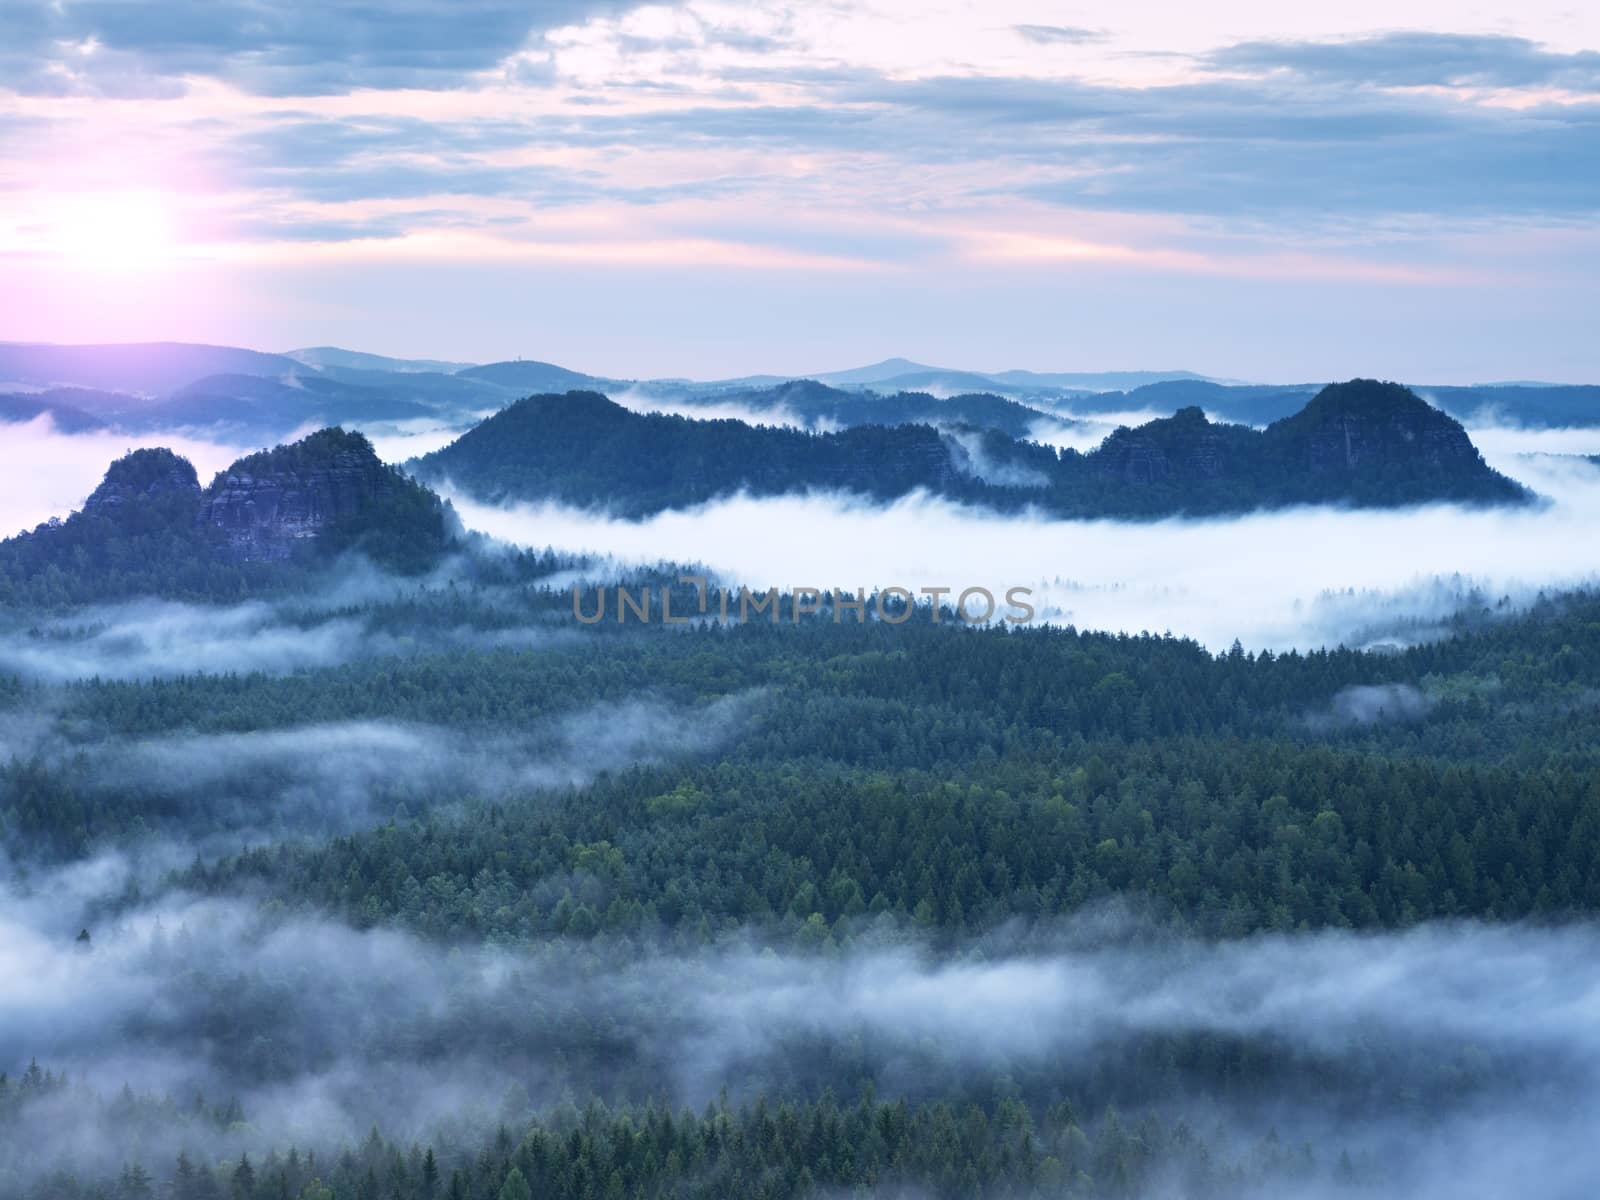 Fairy daybreak in a beautiful hills. Peaks of hills are sticking out from foggy background, the fog is yellow and orange due to sun rays. The fog is swinging between trees.